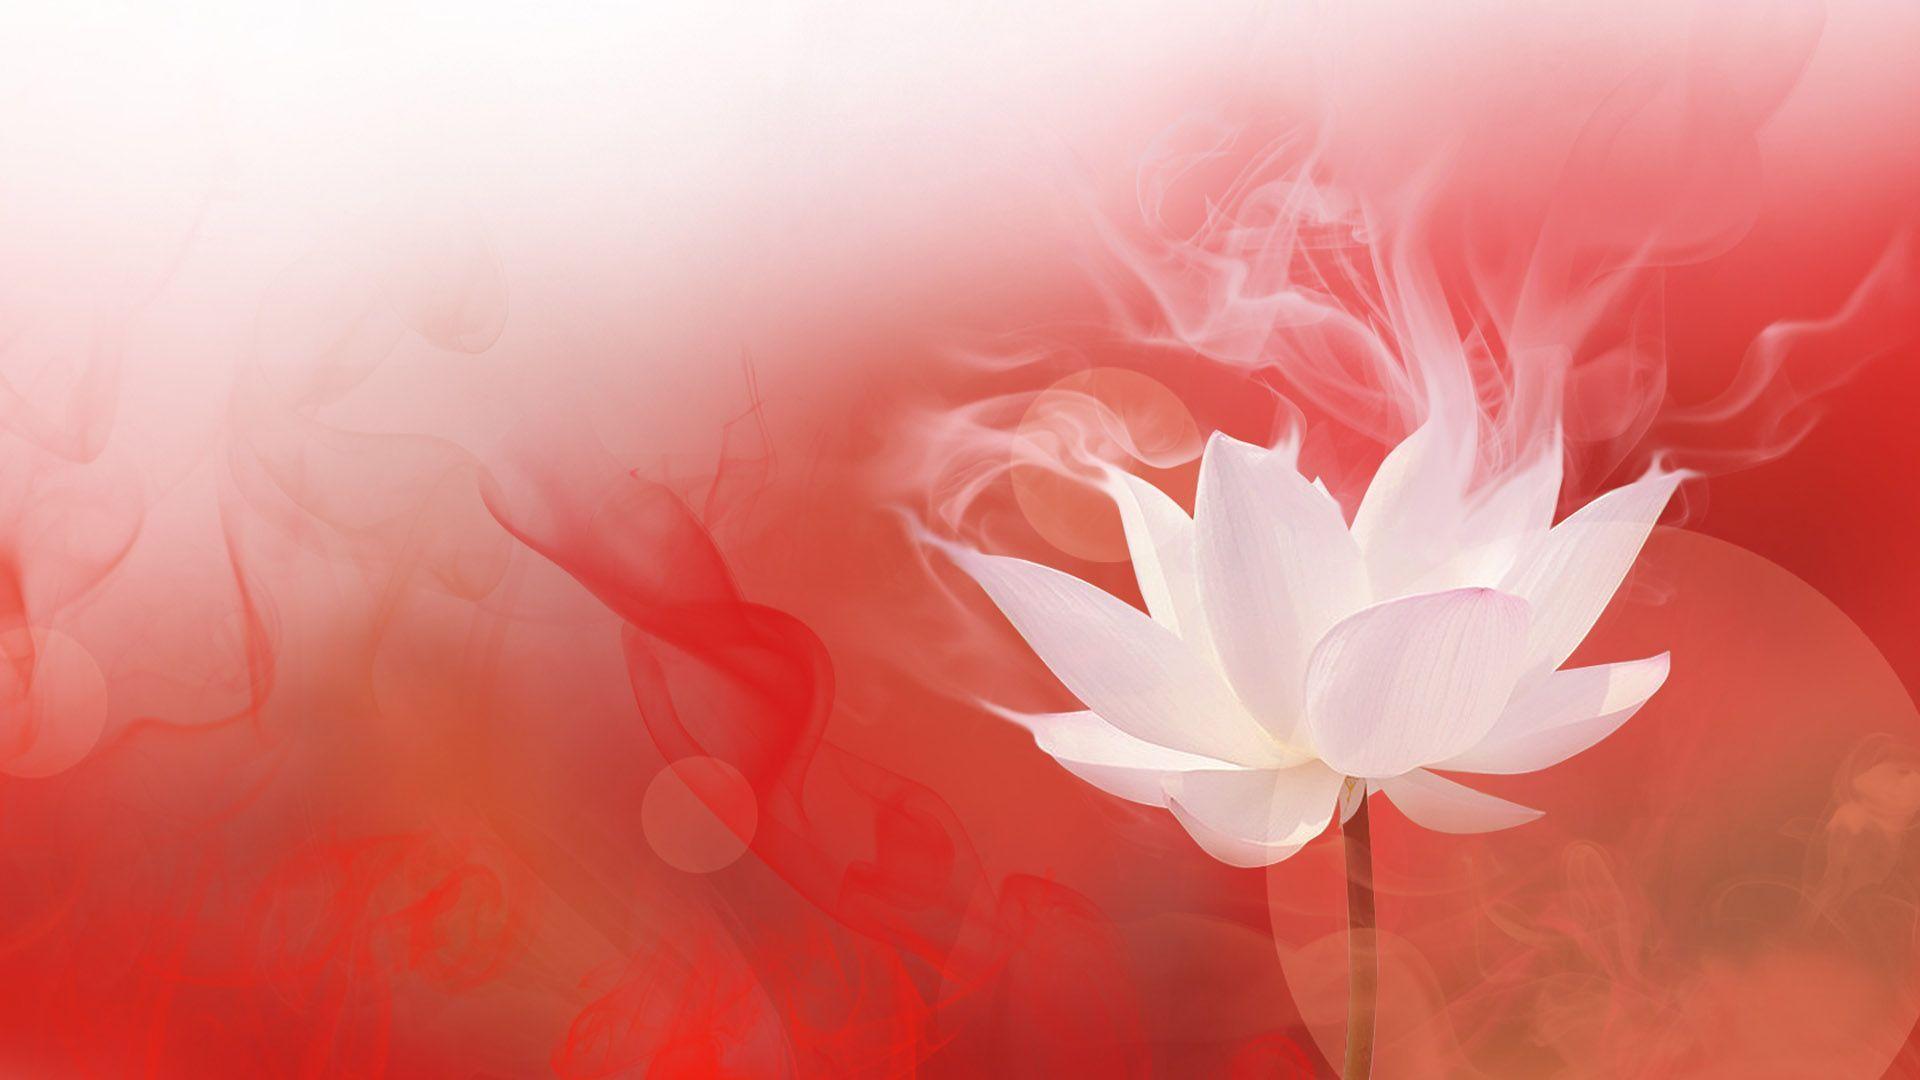 Lotus in the Fire, life is booming, Lotus HD wallpaper, Flowers